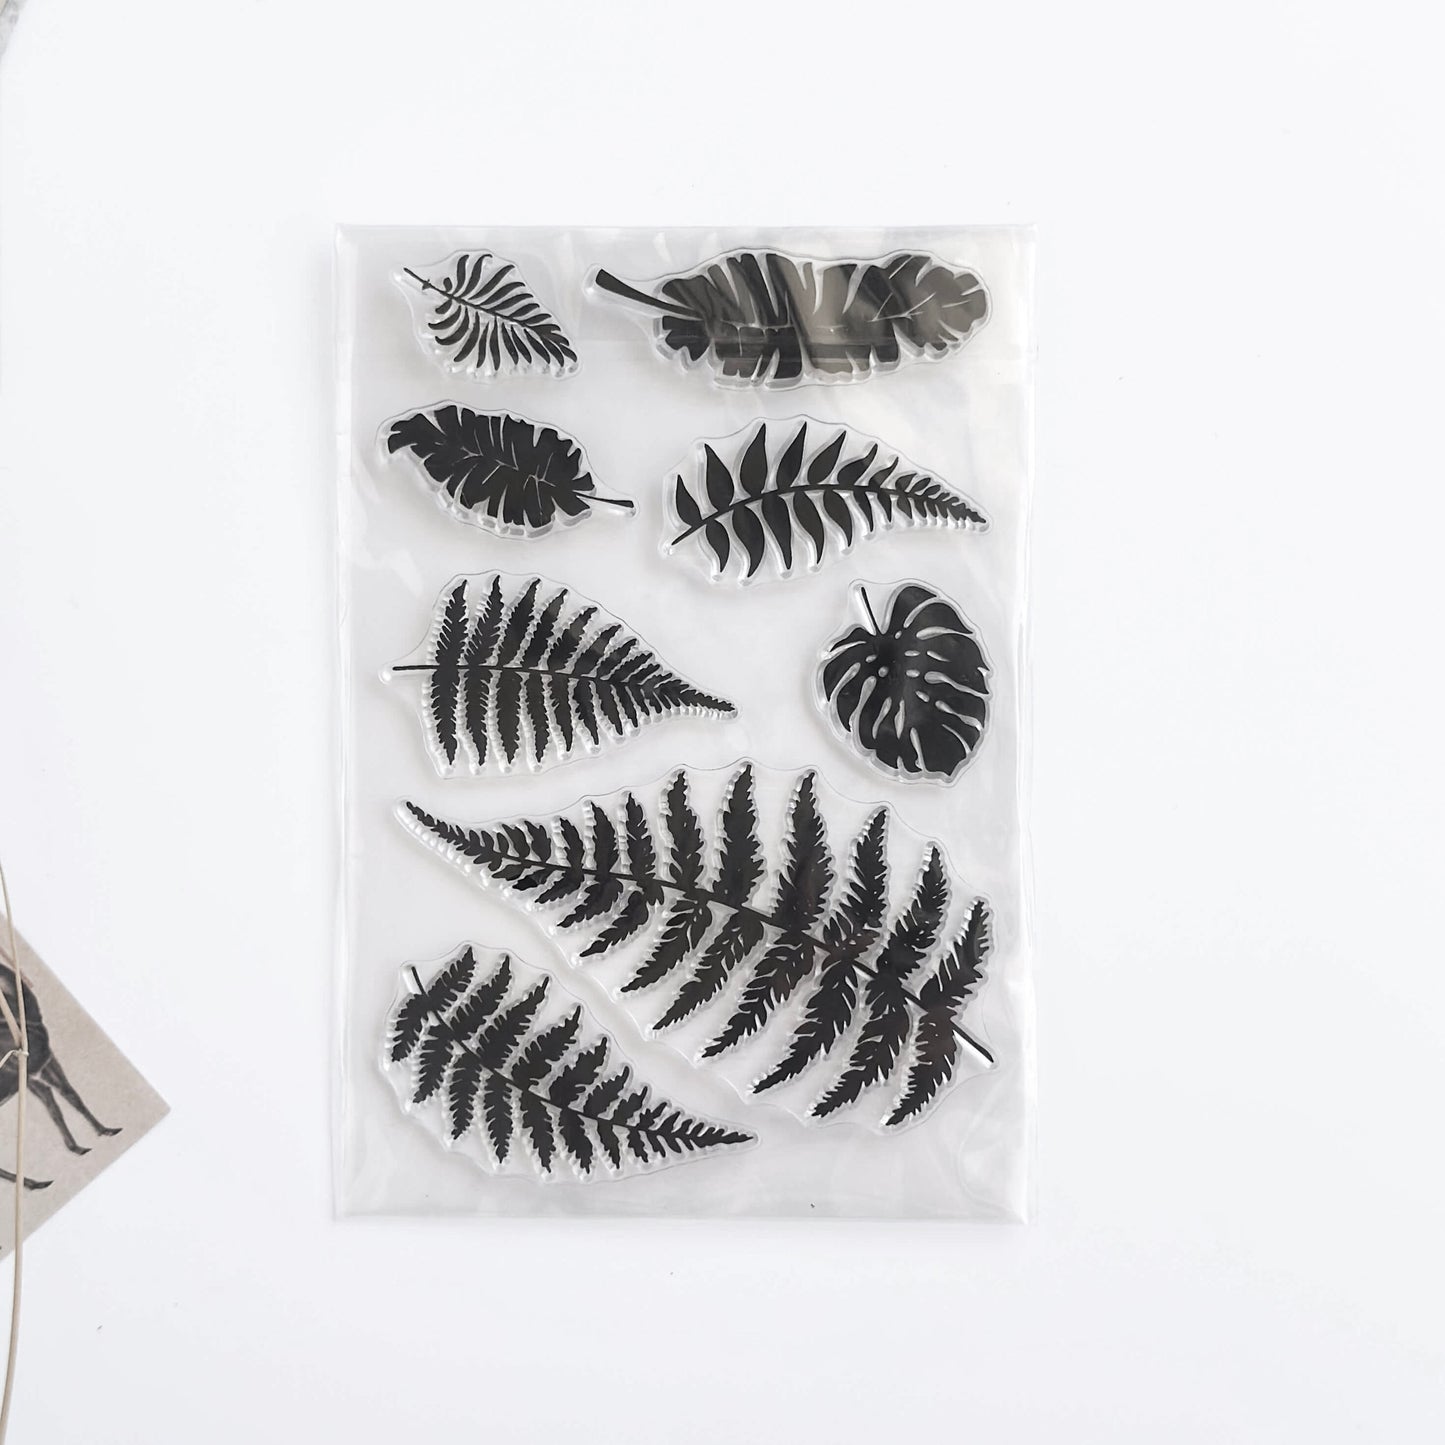 Cling stamps - Ferns